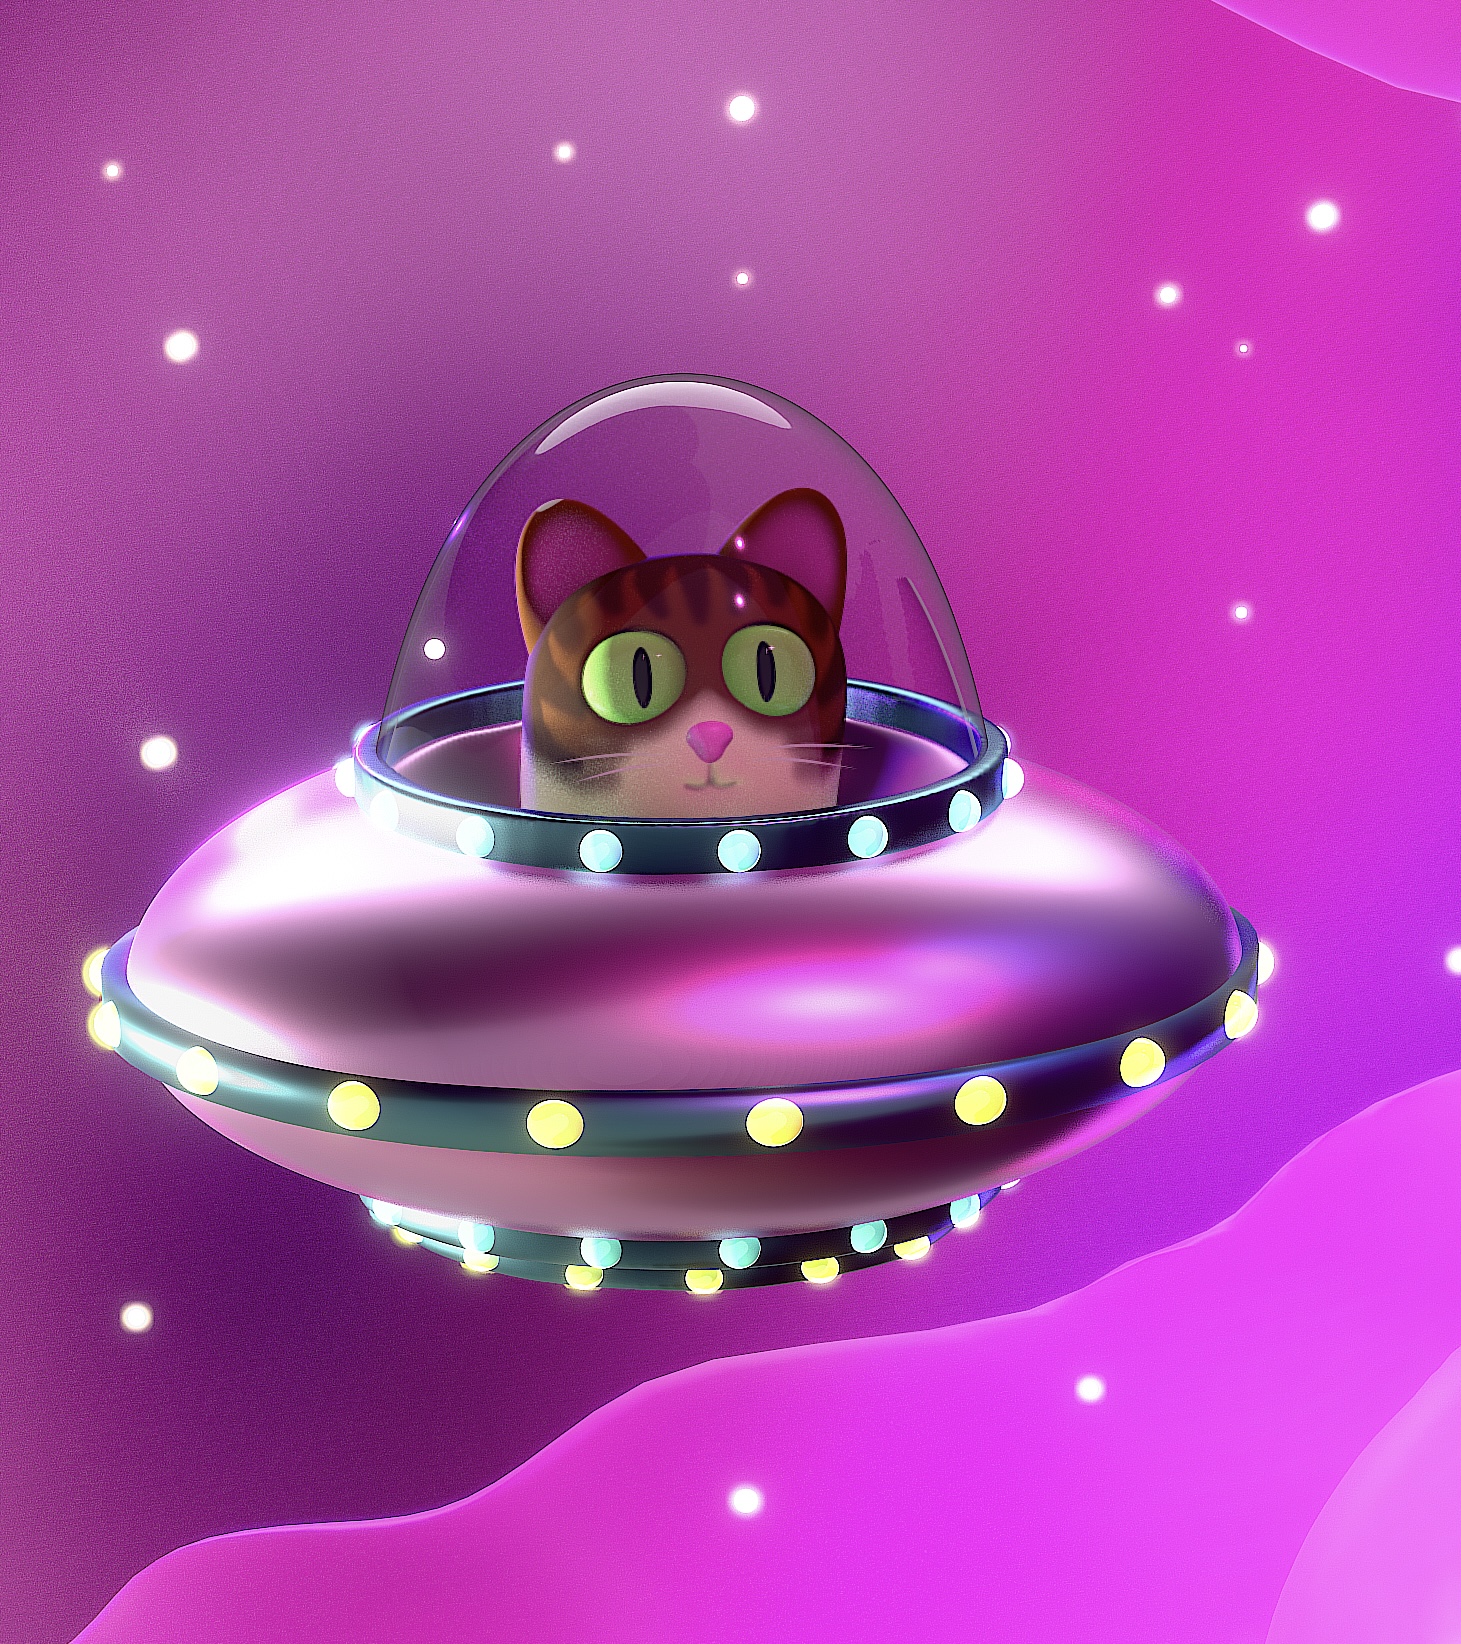 Space Kitty 3D illustration by Amy Denise